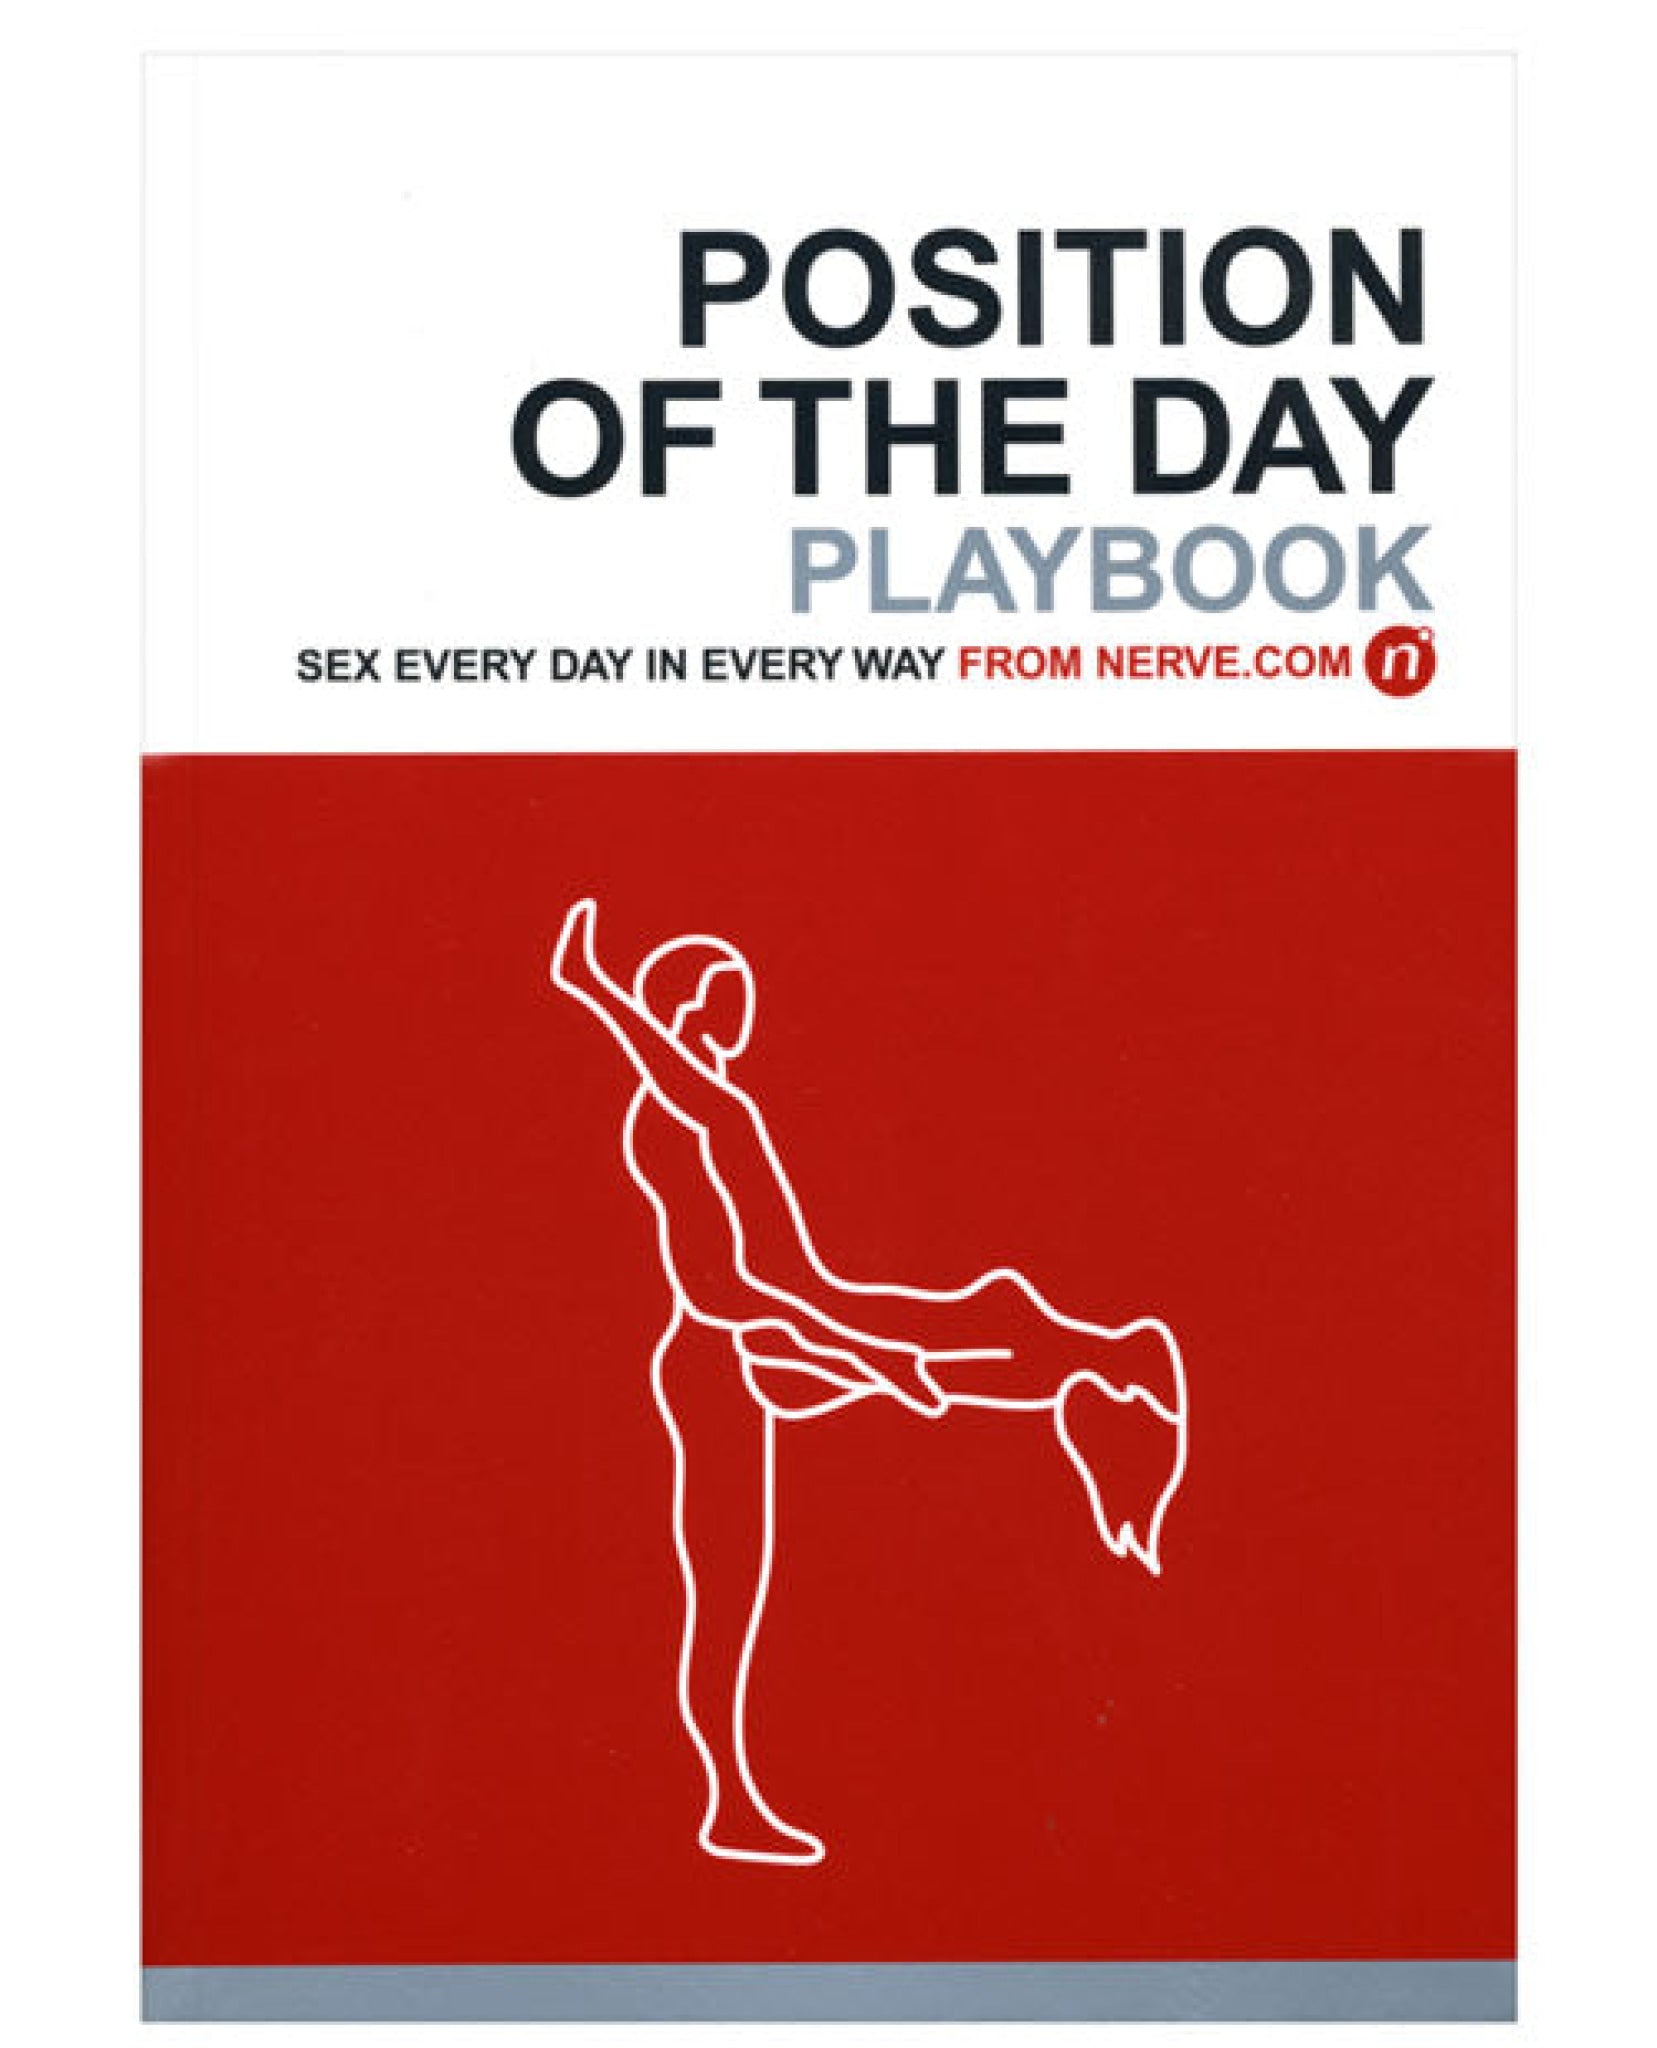 Position Of The Day Playbook Hachette Book Group